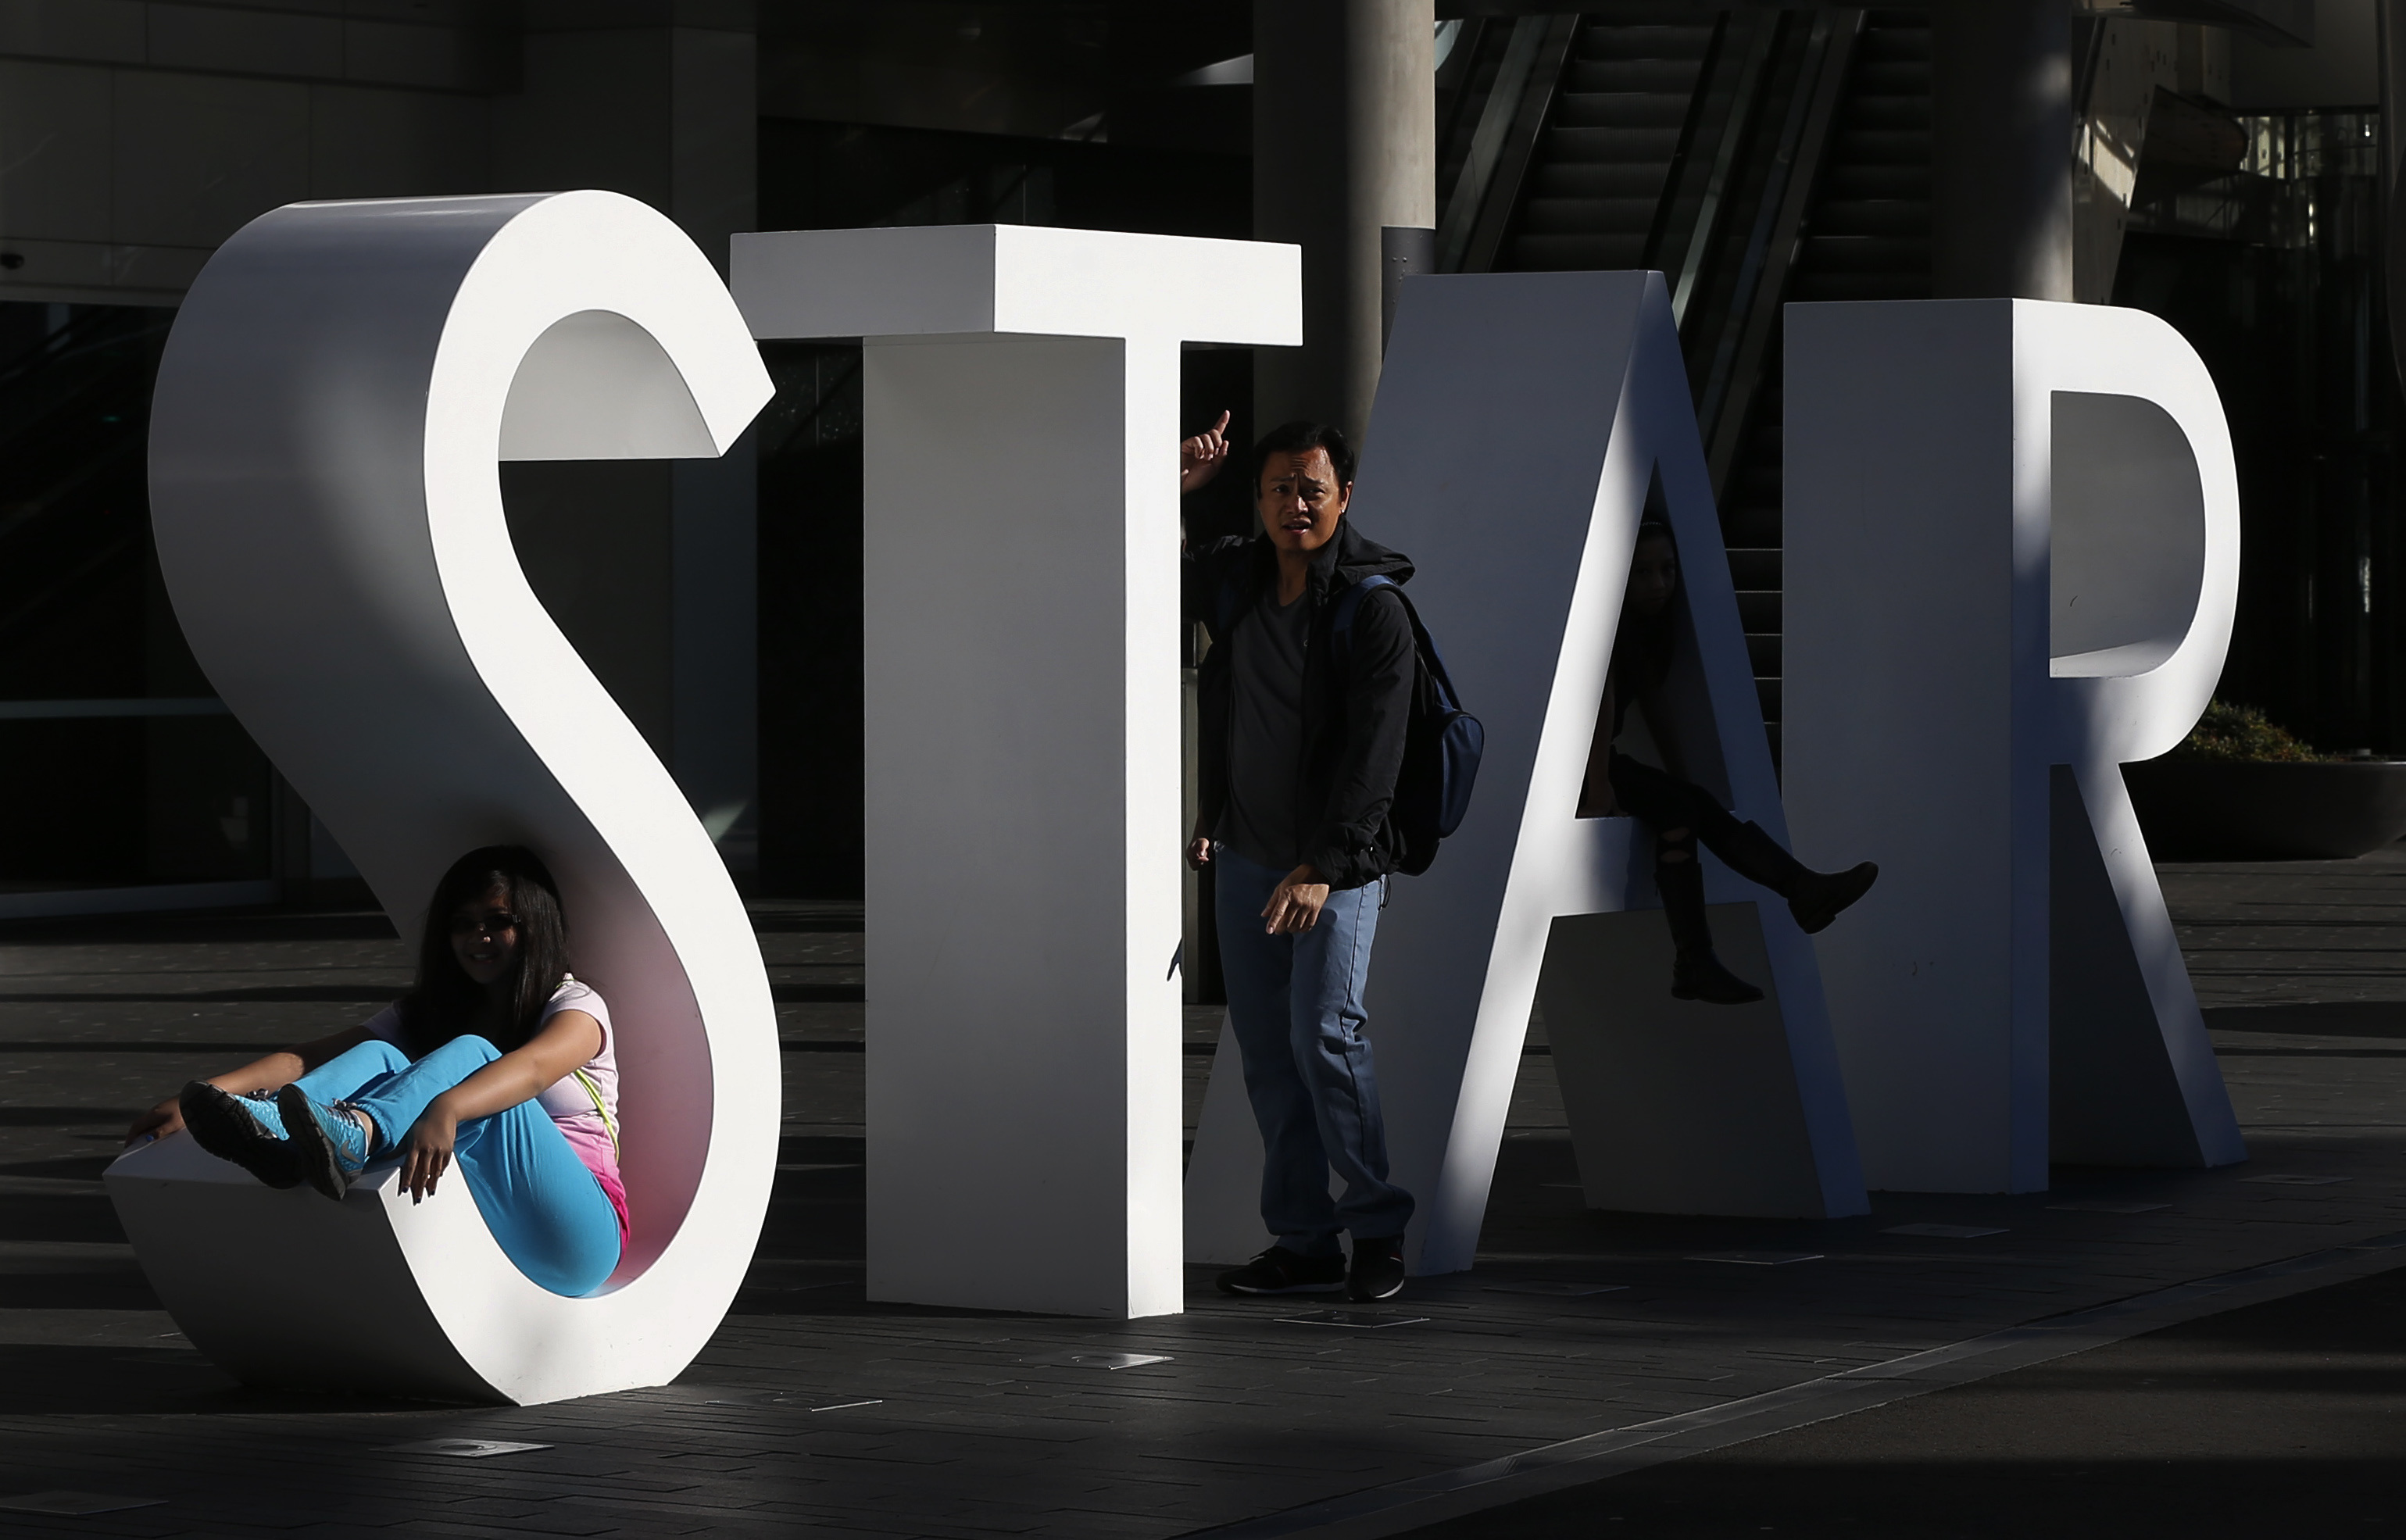 Tourist poses for pictures at the main sign of The Star Casino, owned by Echo Entertainment, at Pyrmont Bay in Sydney